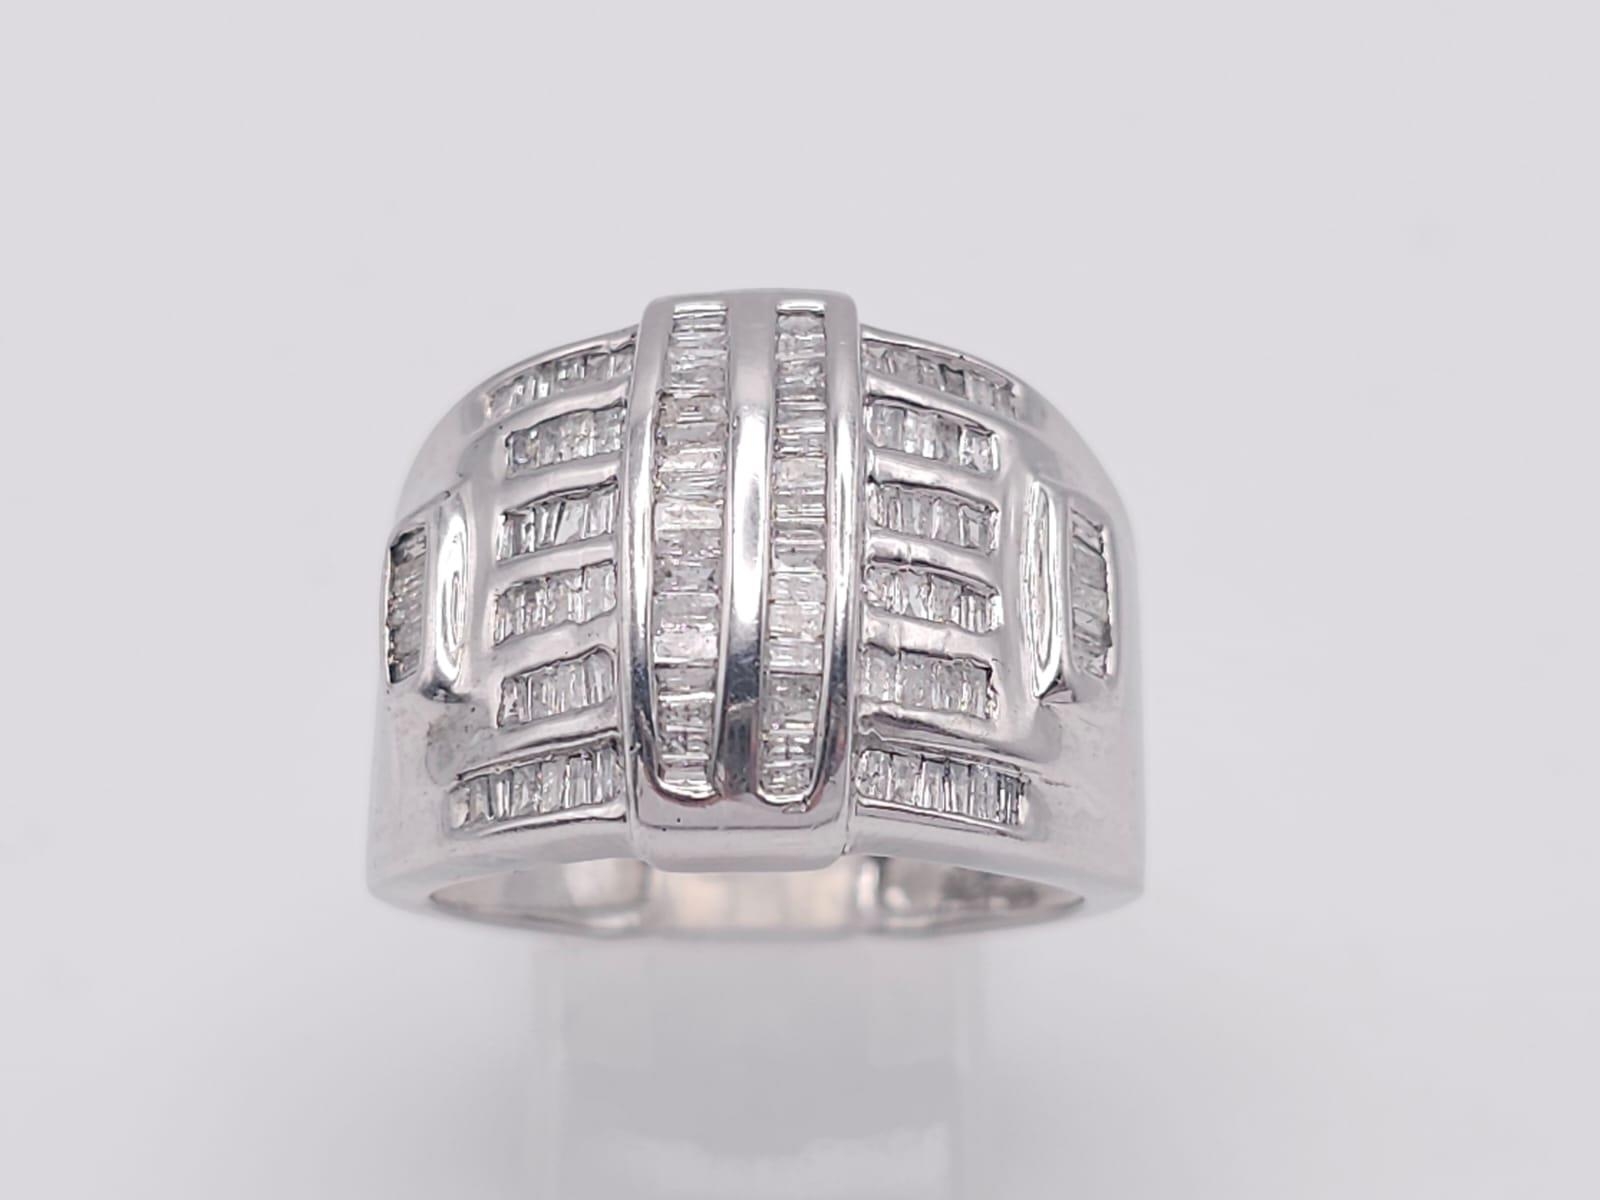 A 10K White Gold Baguette Diamond Cluster Ring. Size V. 1ctw. 7.4g total weight. - Image 4 of 9